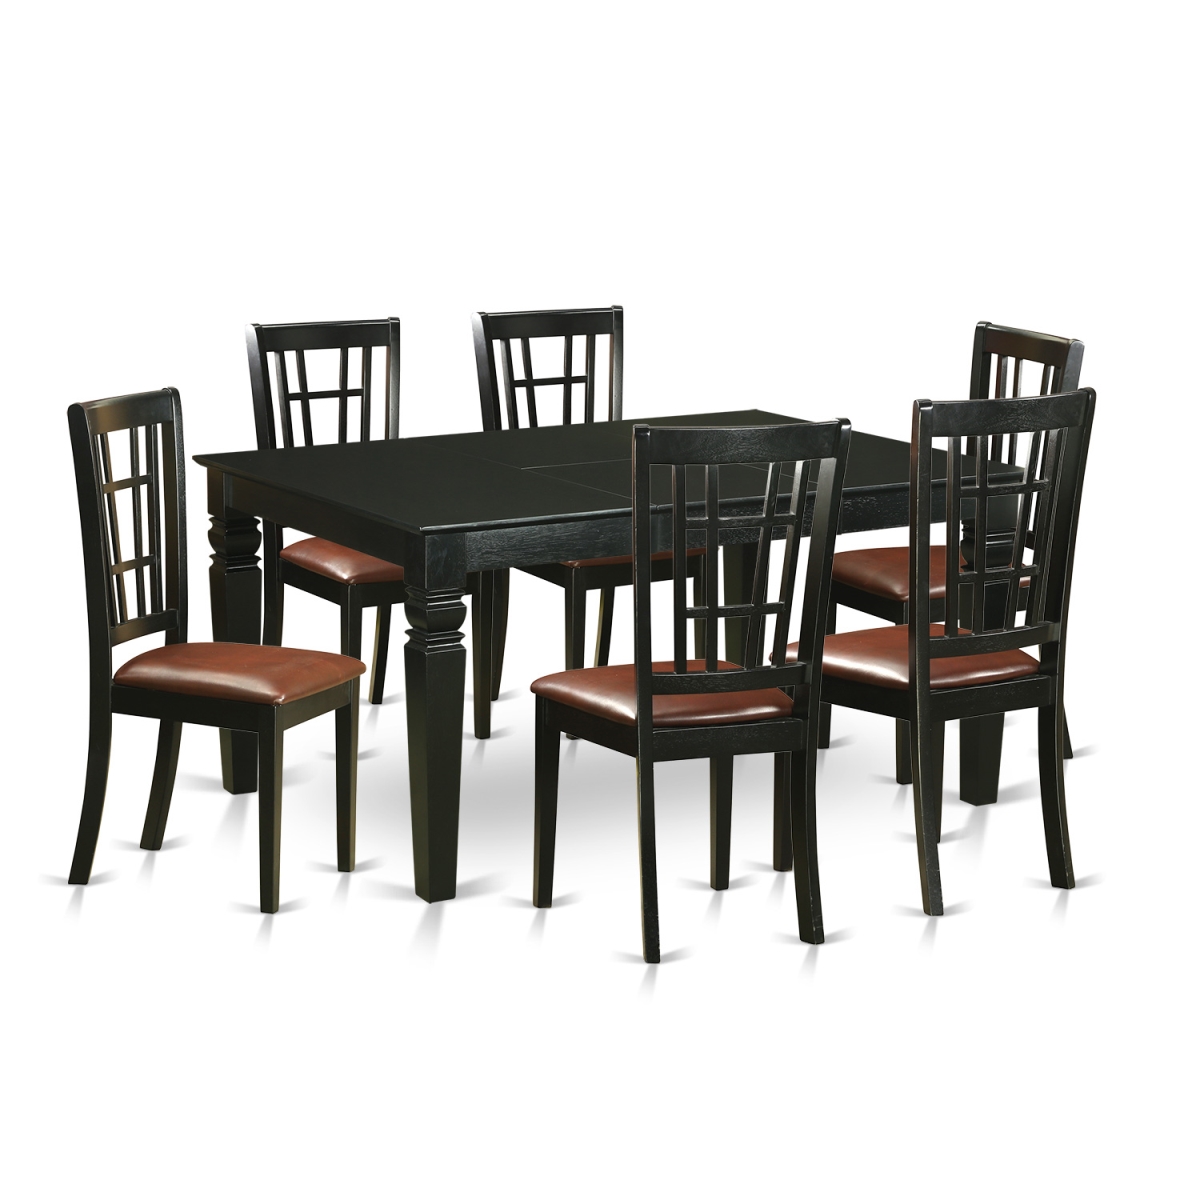 WENI7-BLK-LC Faux Leather Dining Room Sets - Small Kitchen Table & 6 Chairs, Black - 7 Piece -  East West Furniture